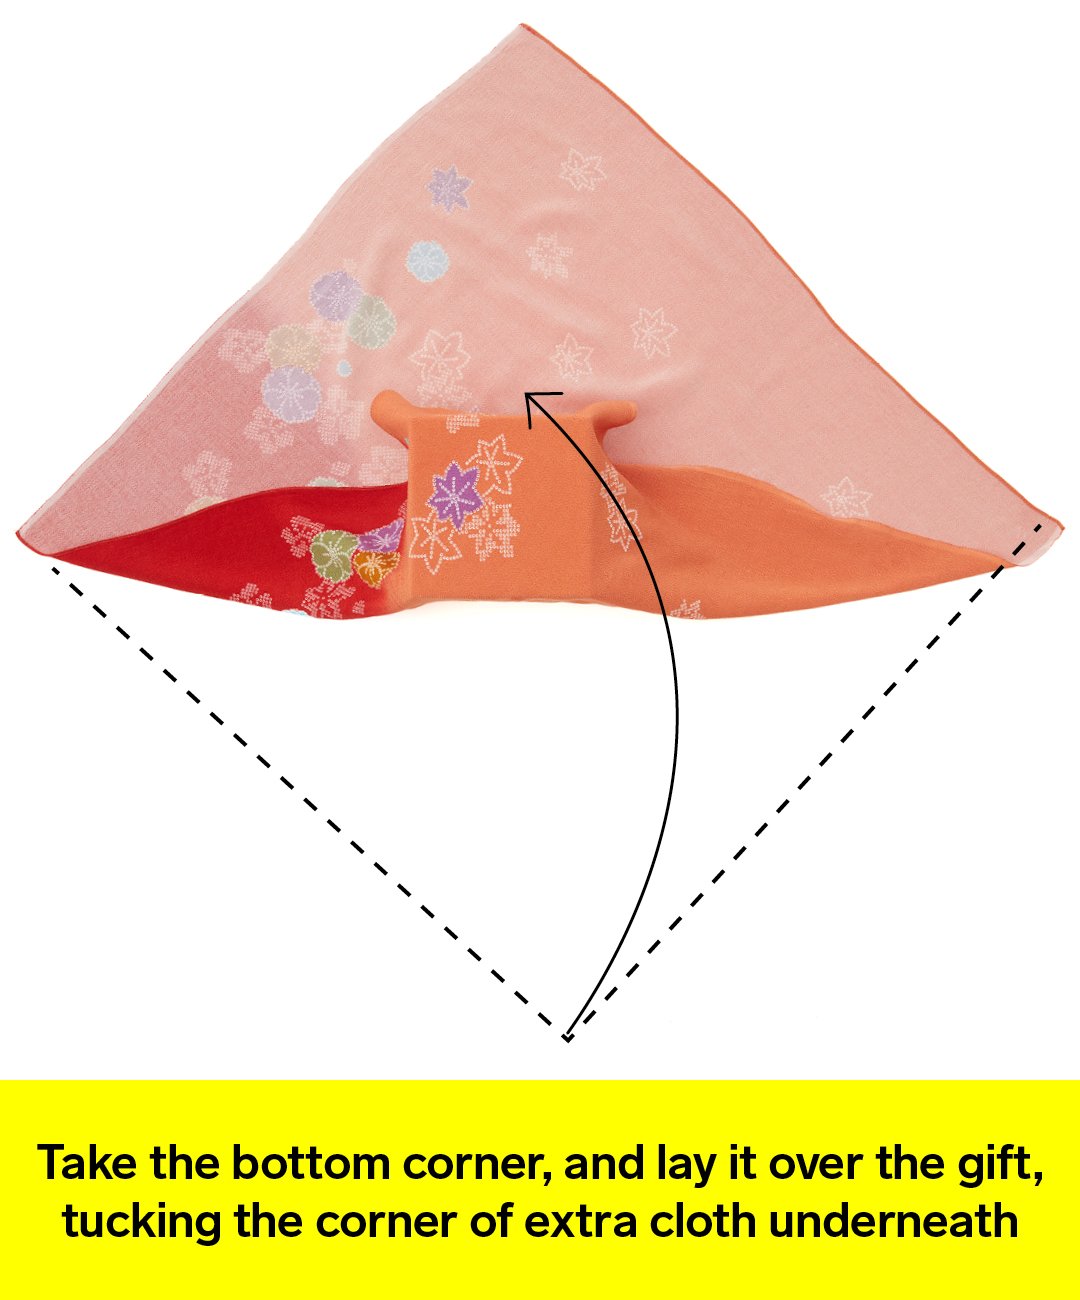 Graphic showing how to fold cloth over gift